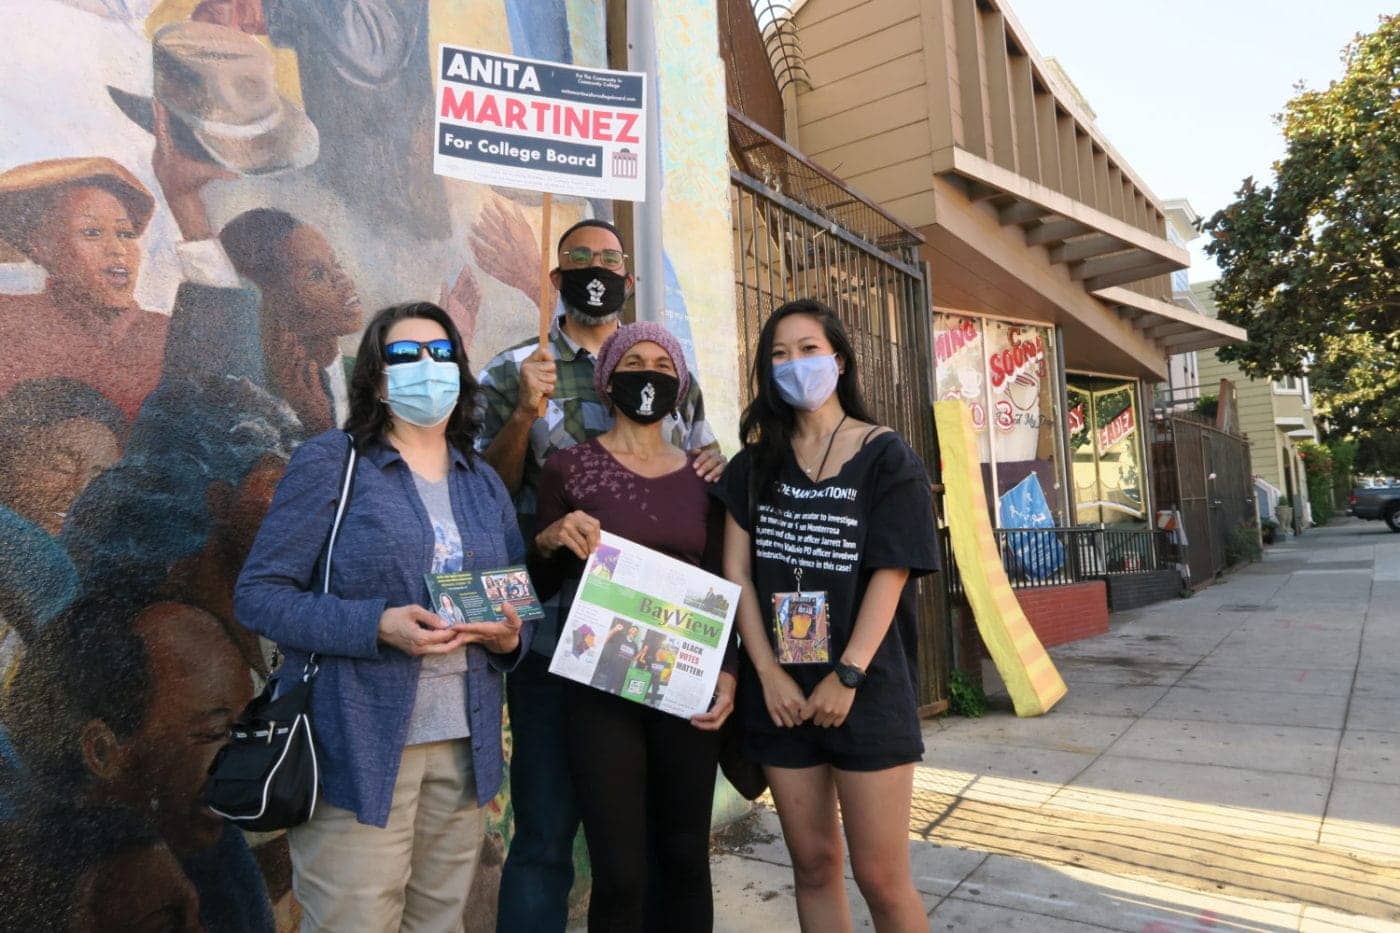 Anita-Martinez-Nube-Malik-Eira-Kien-at-Palou-mural-102620-by-David-Horowitz-1400x933, Our culture of resistance: Dismantle institutional racism at City College now, Local News & Views 